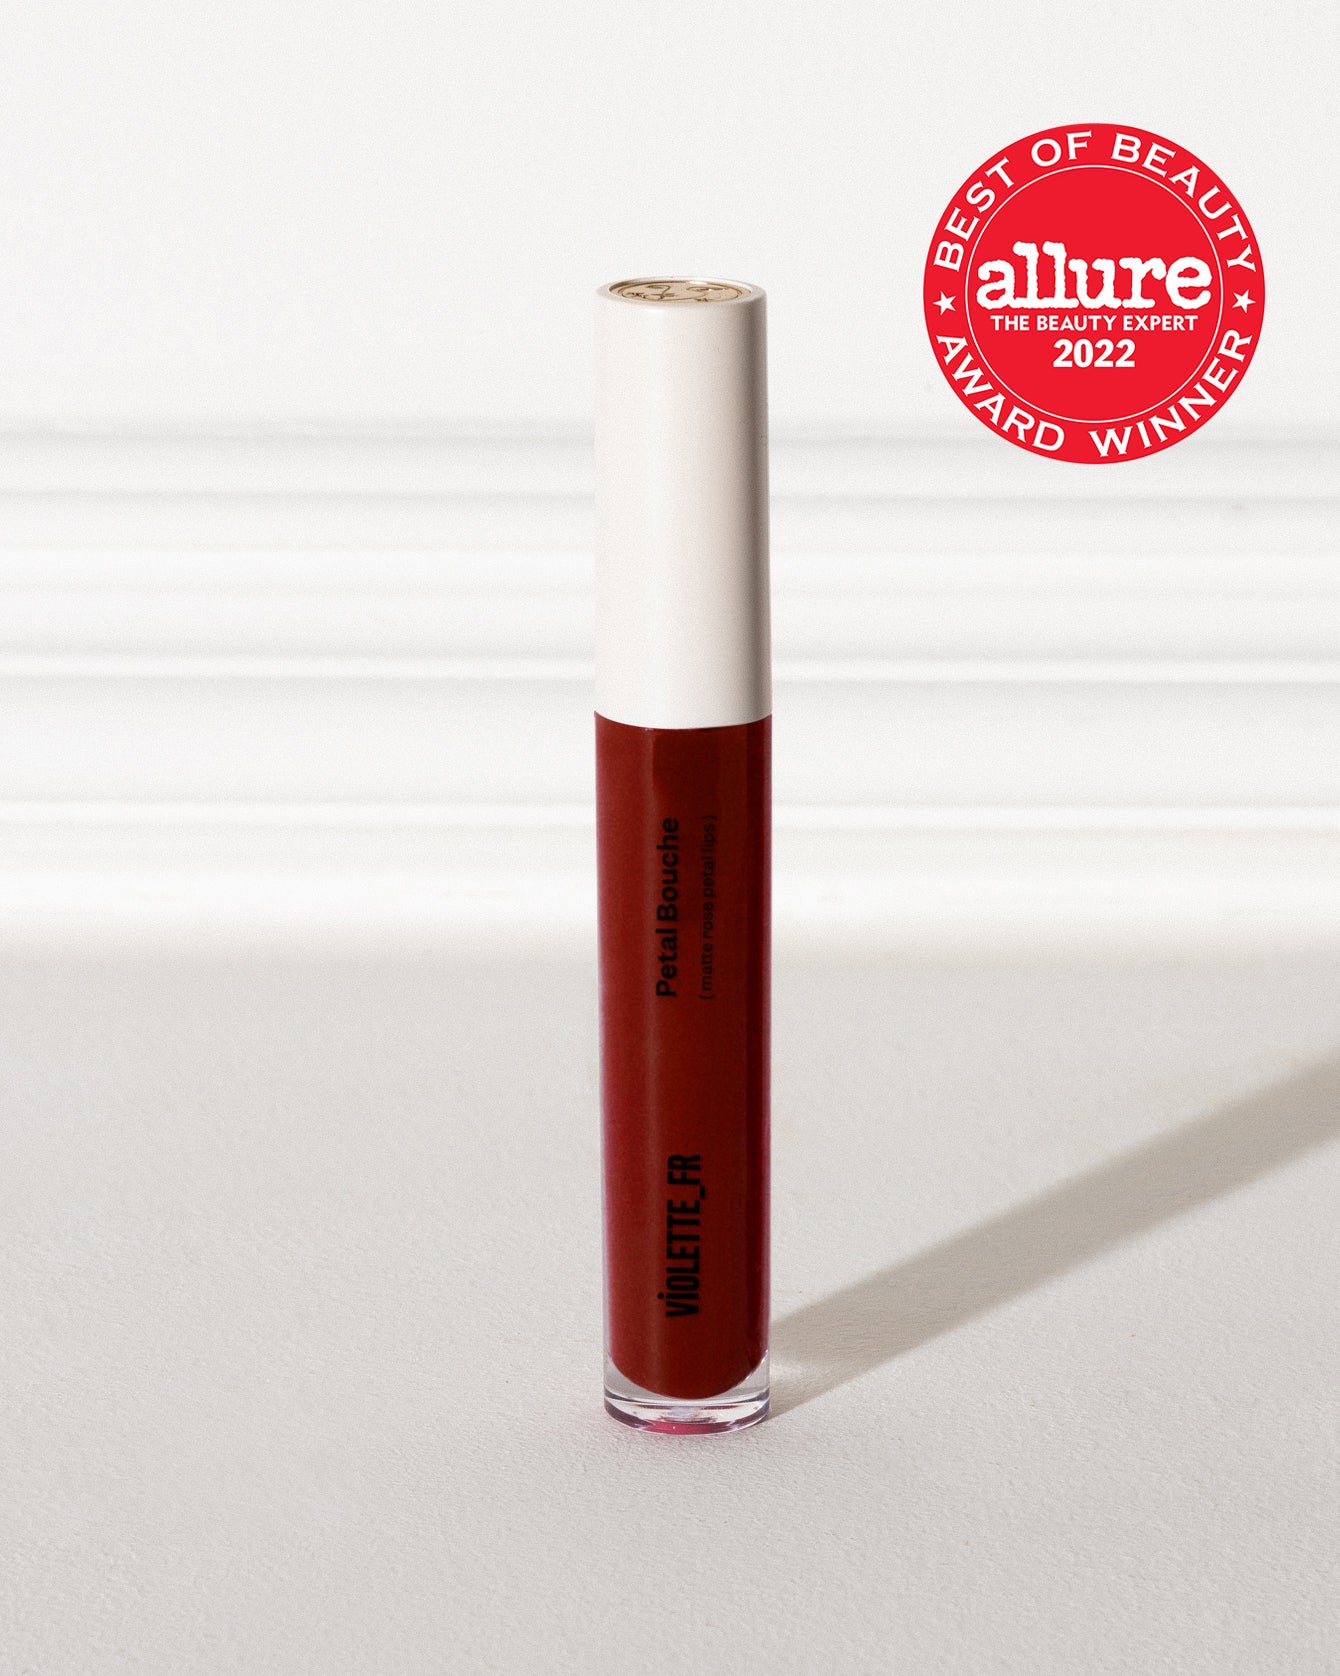 Re: Red Lipgloss - Beauty Insider Community